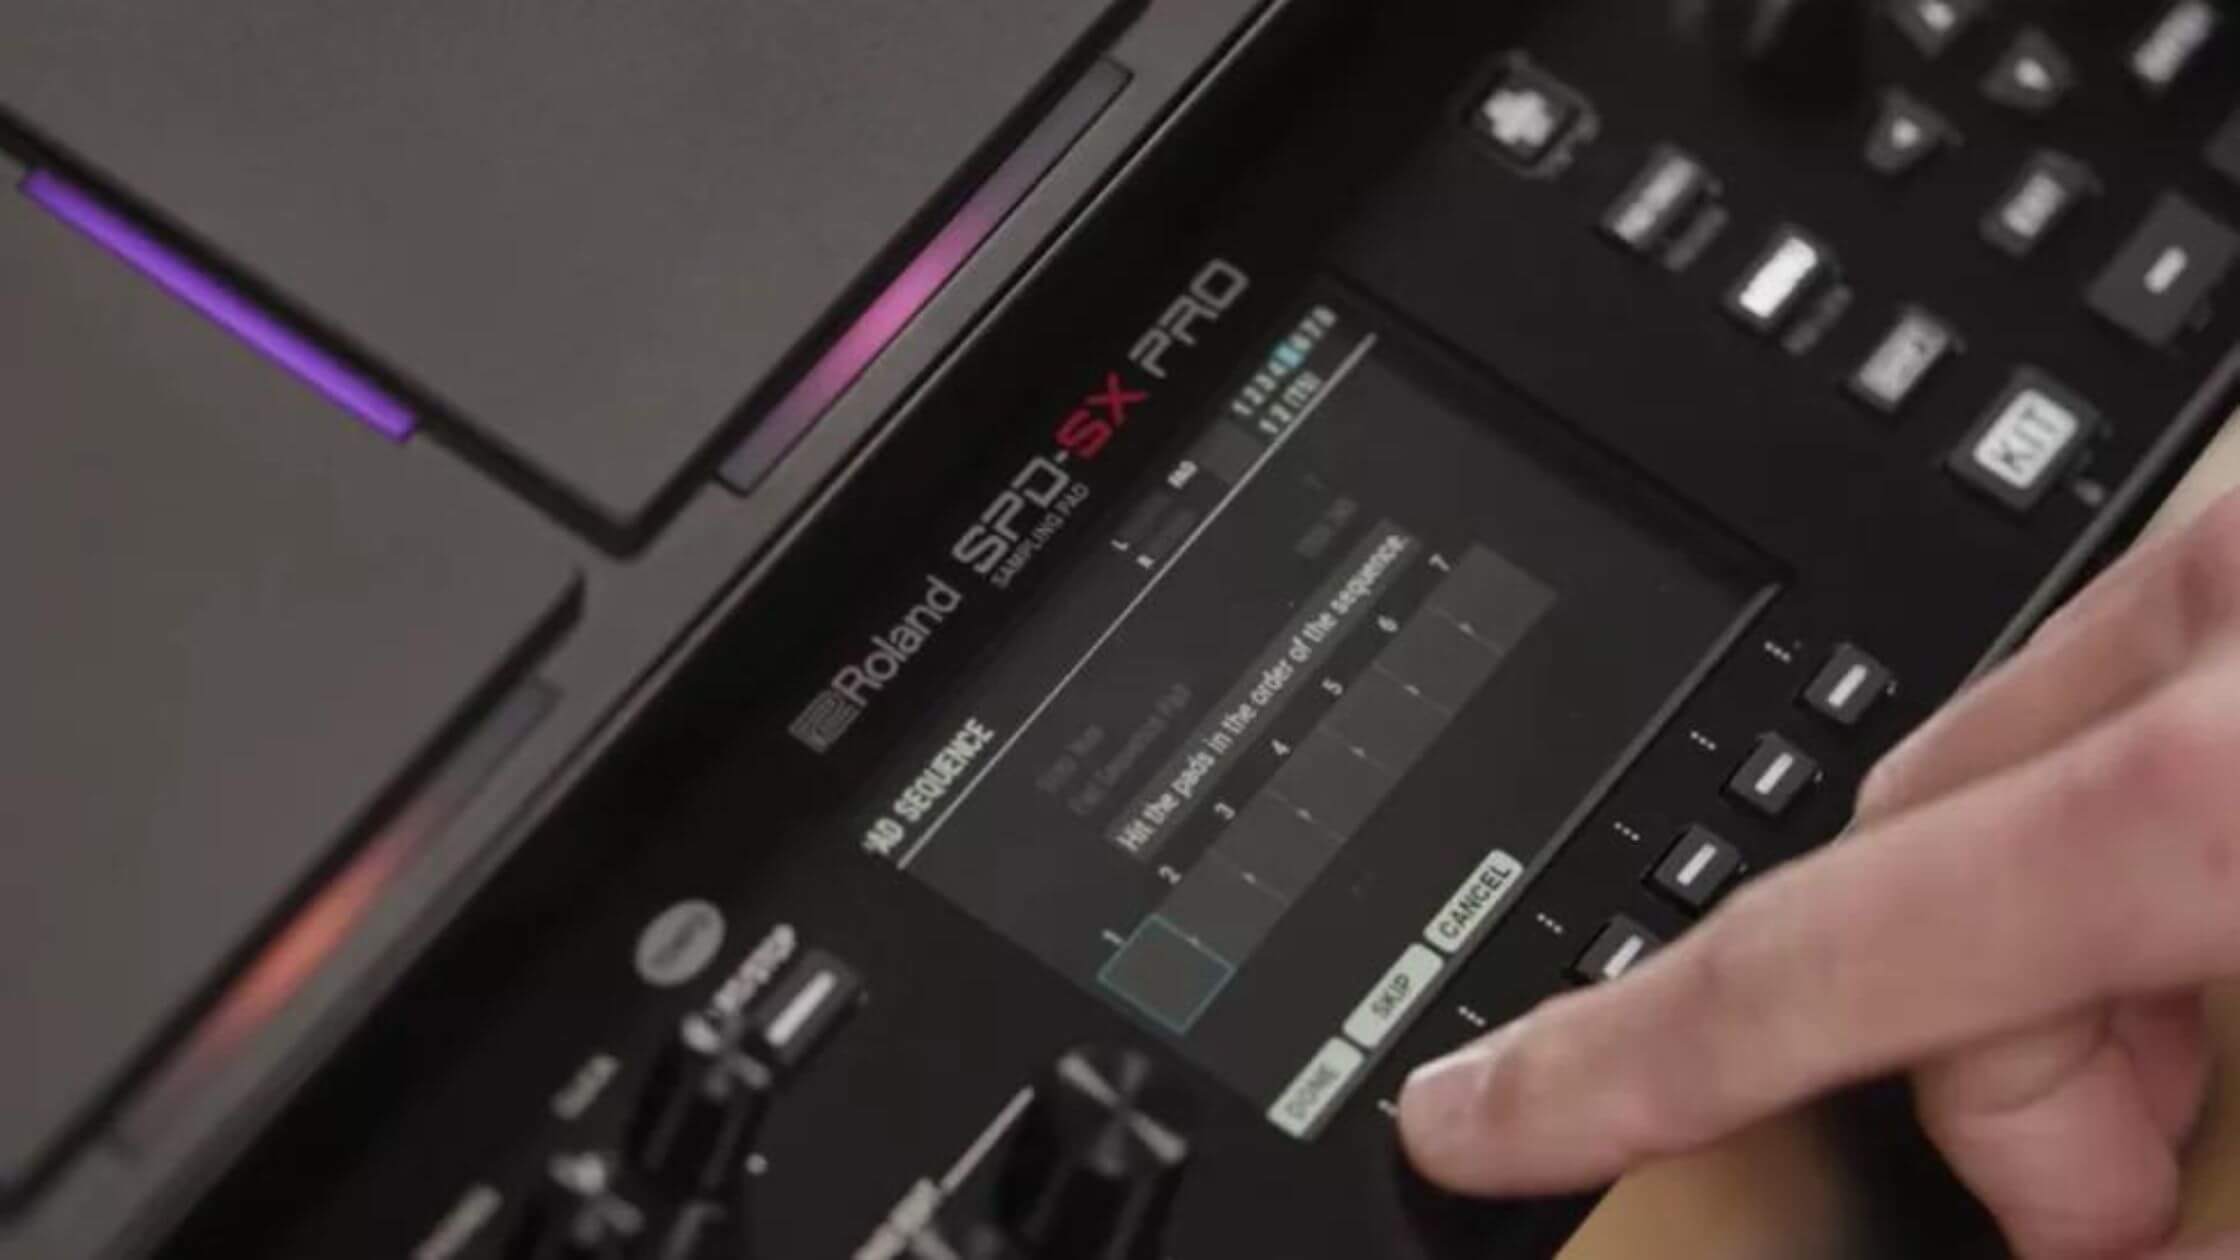 Roland SPD-SX Pro: for sample-based performance and production